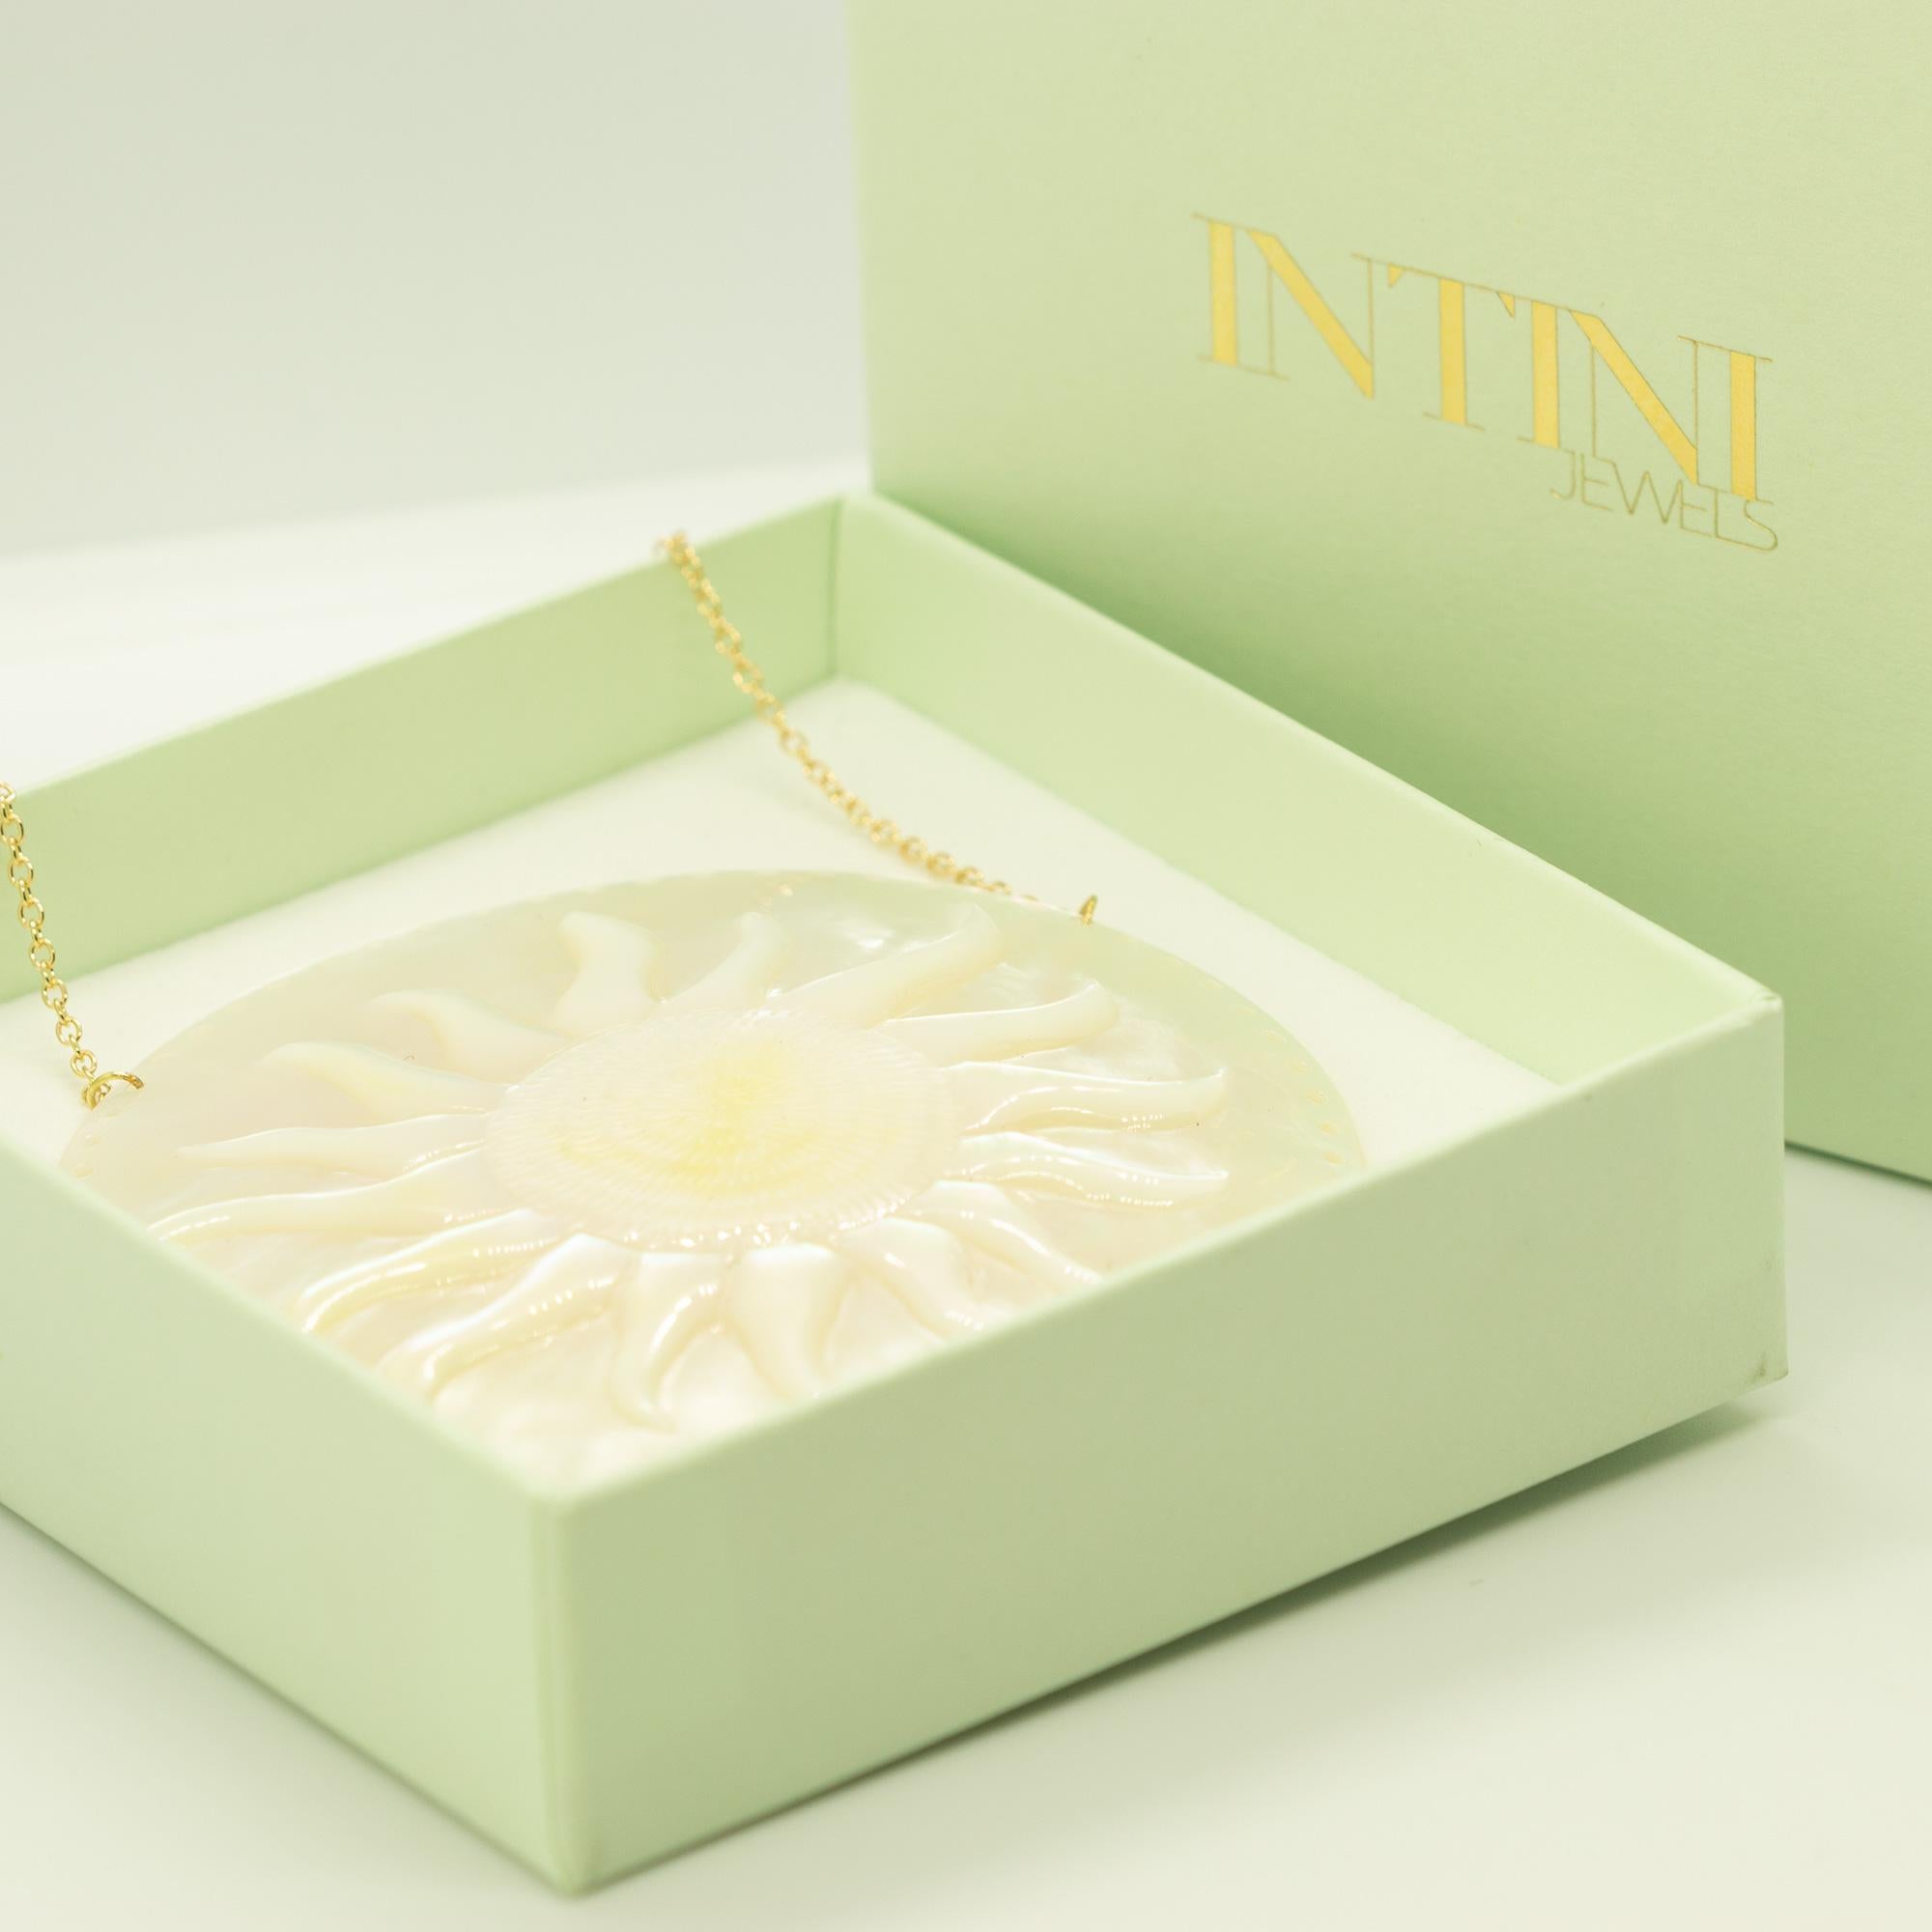 Art Nouveau Intini Jewels Mother of Pearl 18K Yellow Gold Sun Pendant Summer Chic Necklace For Sale